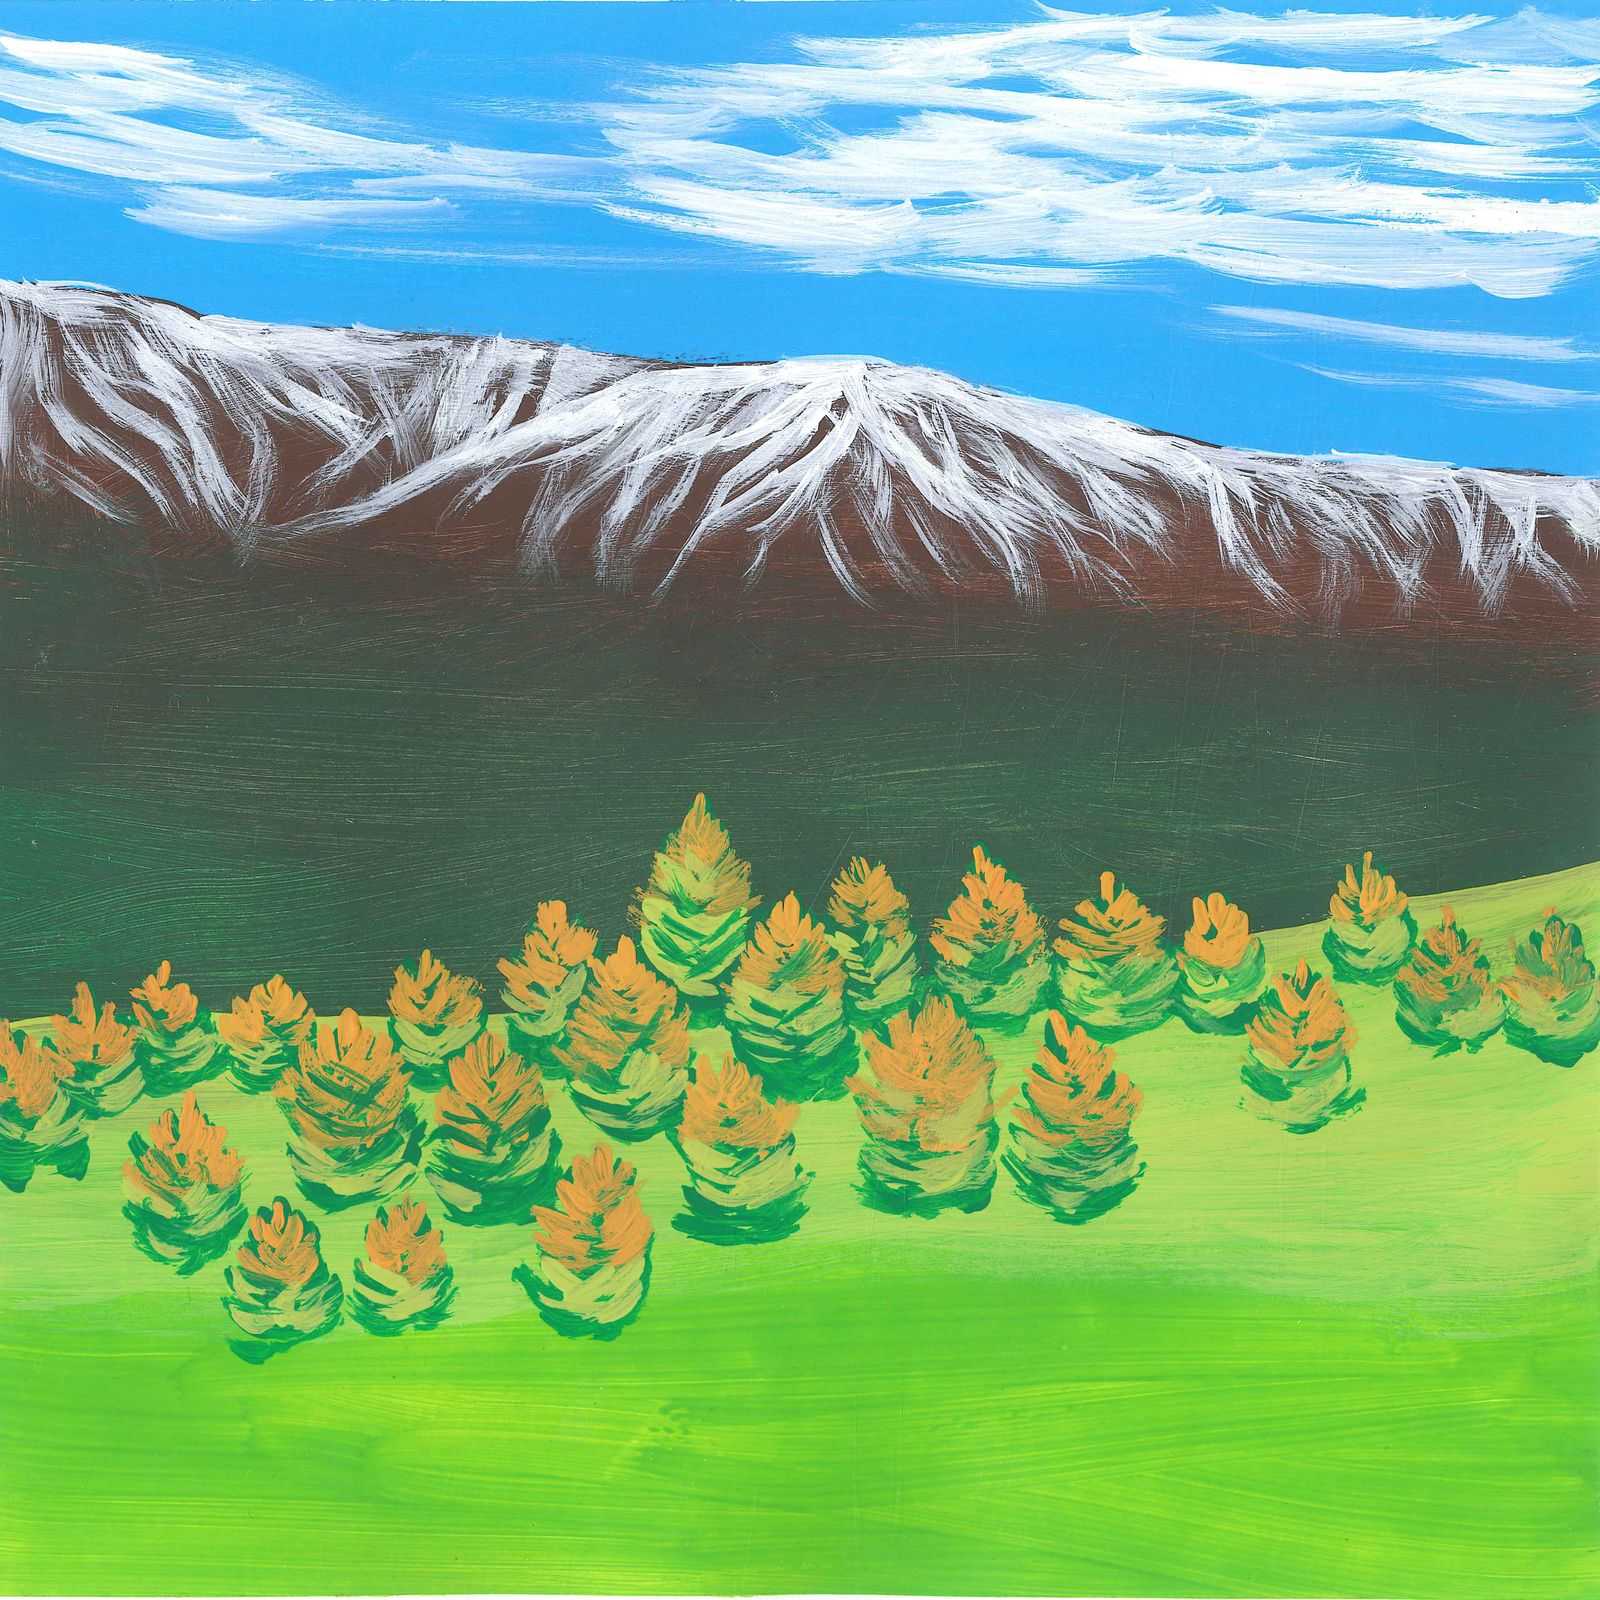 Storm in the High Atlas Mountains - nature landscape painting - earth.fm